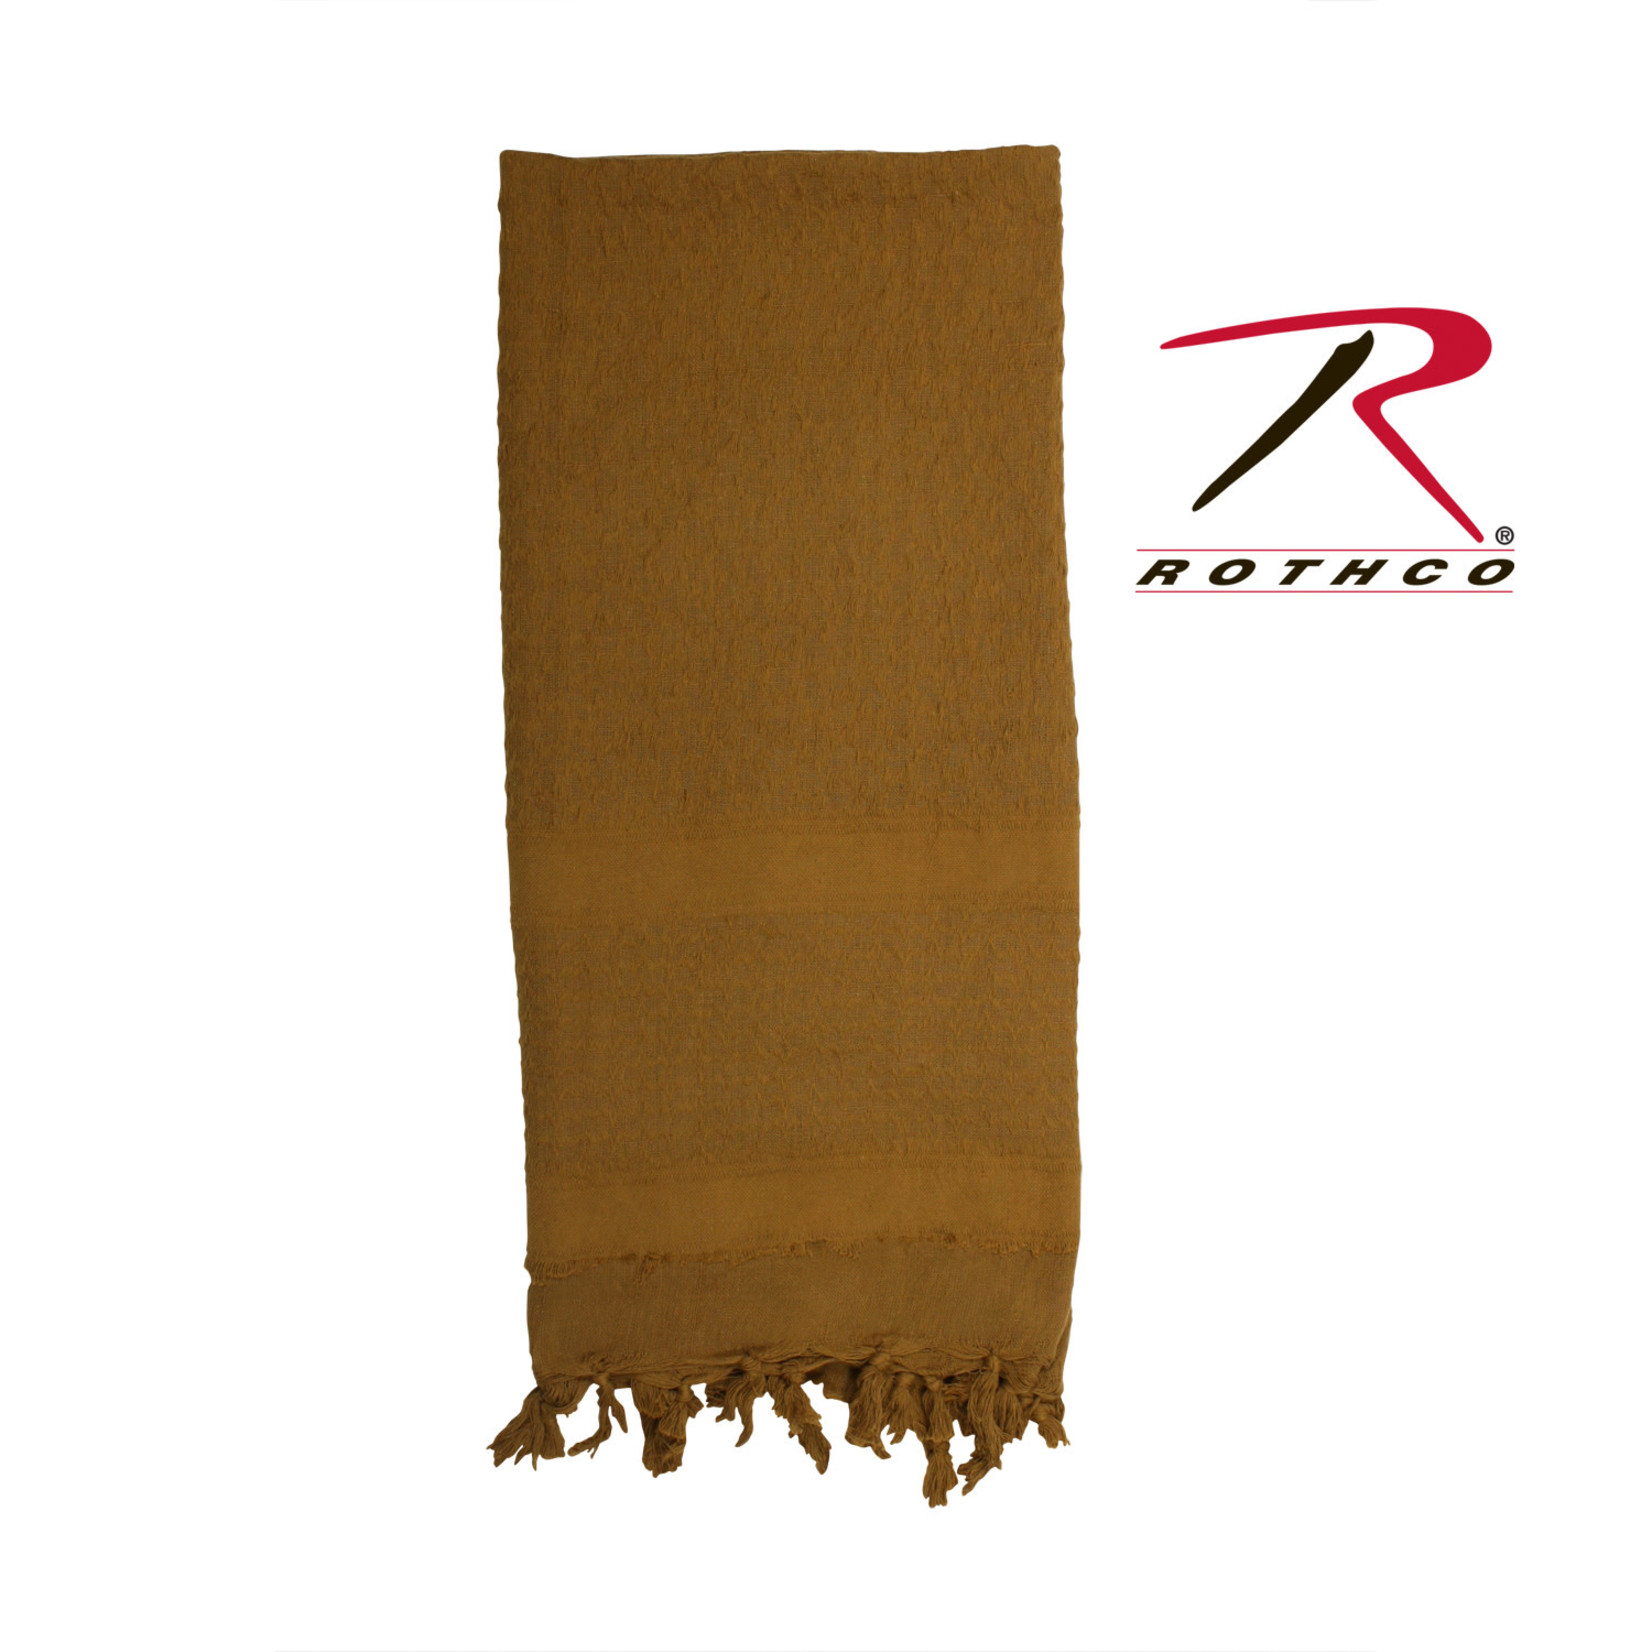 Rothco Rothco Solid Color Shemagh/Keffiyeh Tactical Scarf